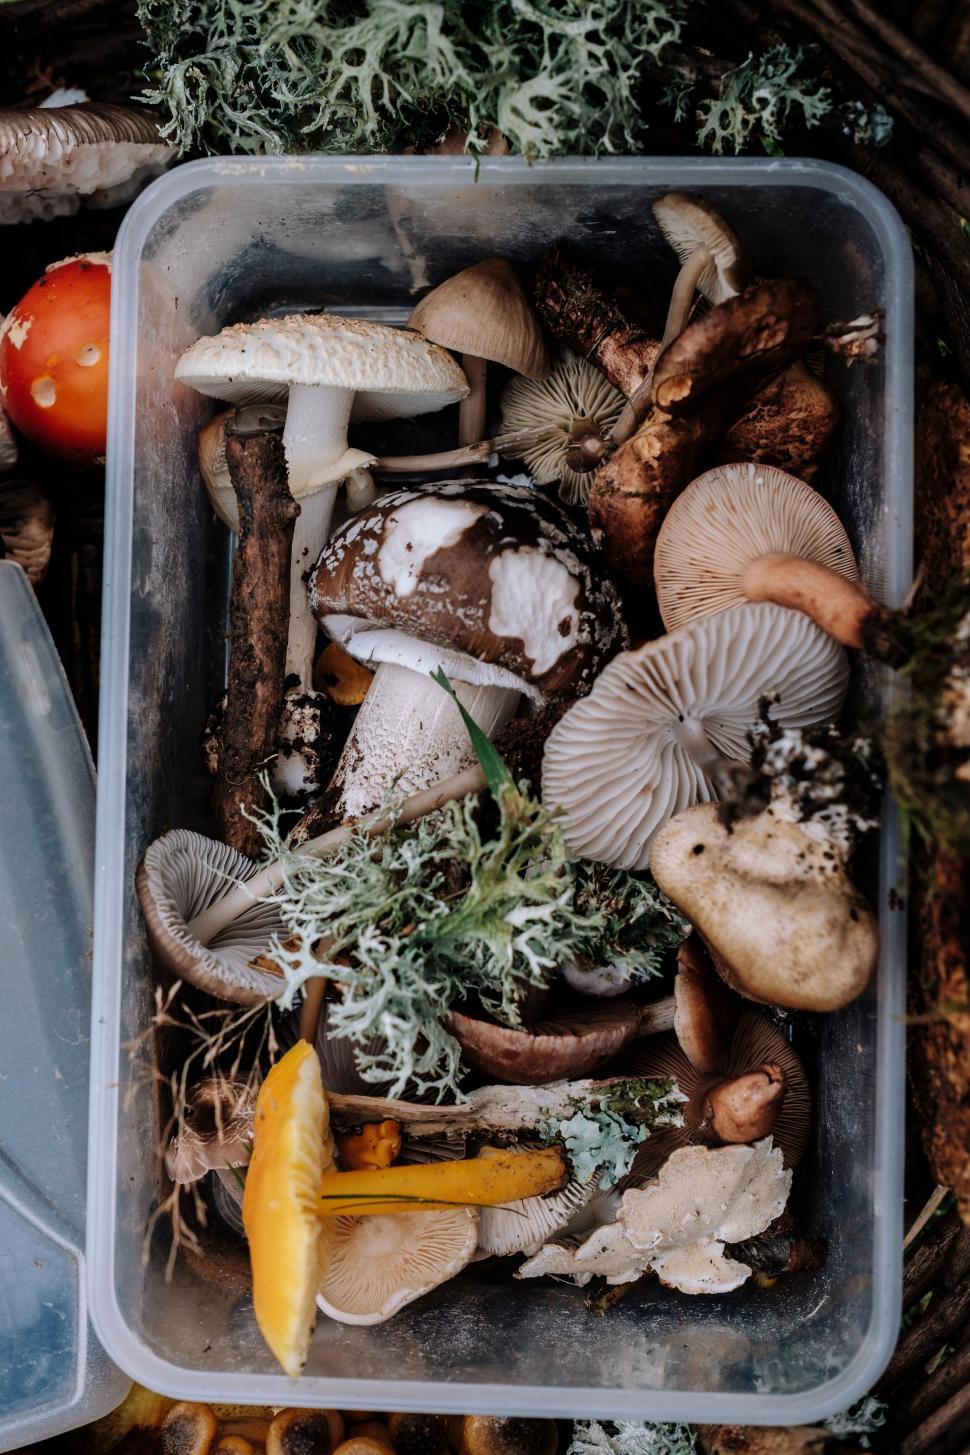 Free Image of Assorted Mushrooms in a Container 